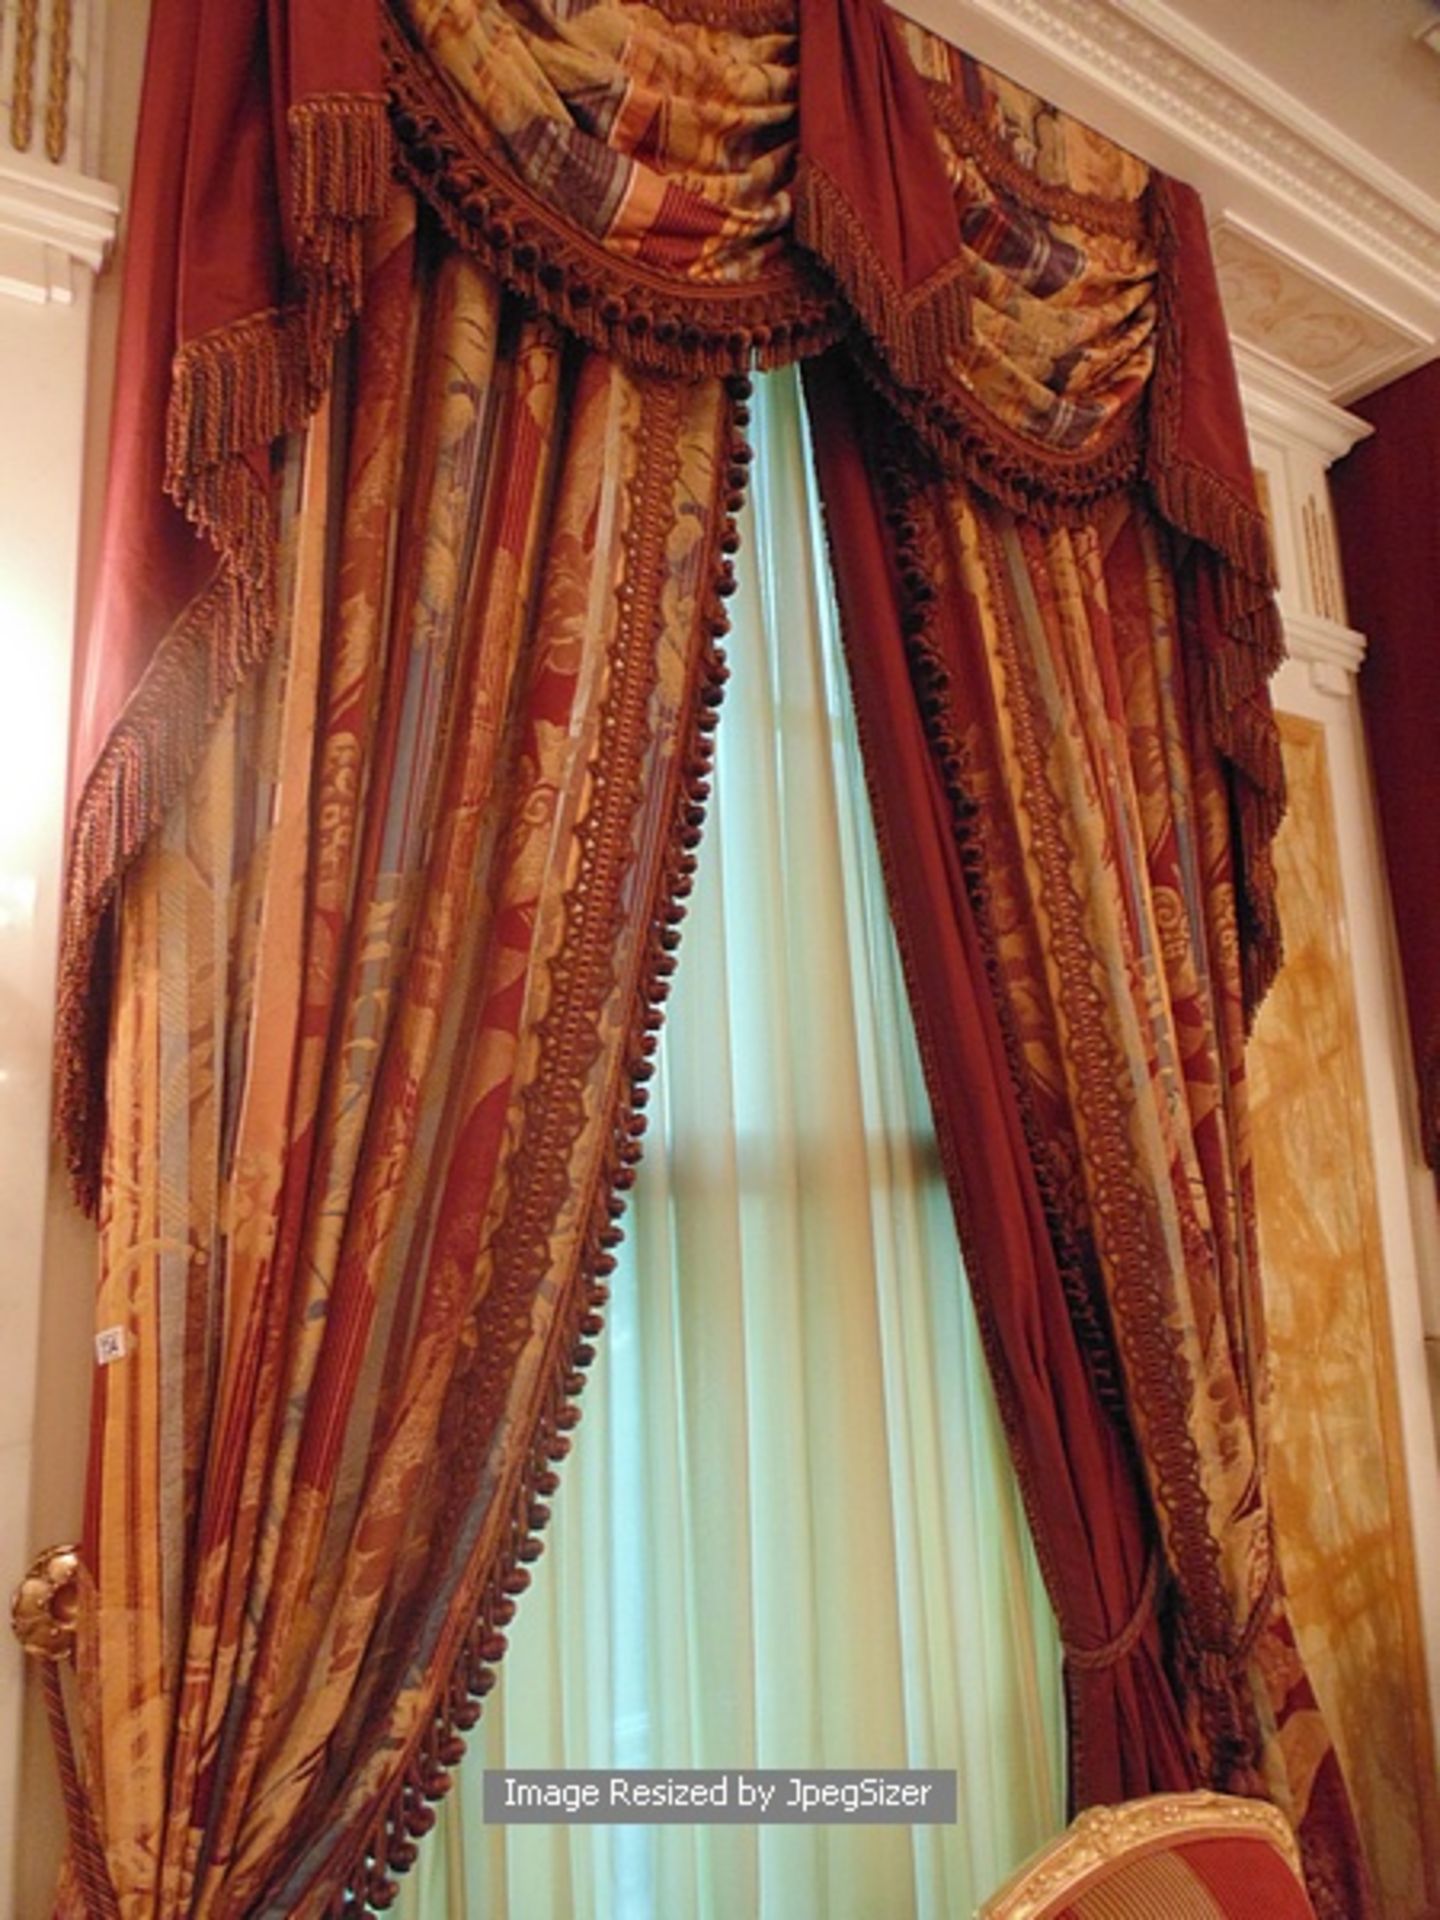 A pair of gold and burgundy curtains supplied by Jacquard from Rudolph Ackermann`s A series design - Image 2 of 7